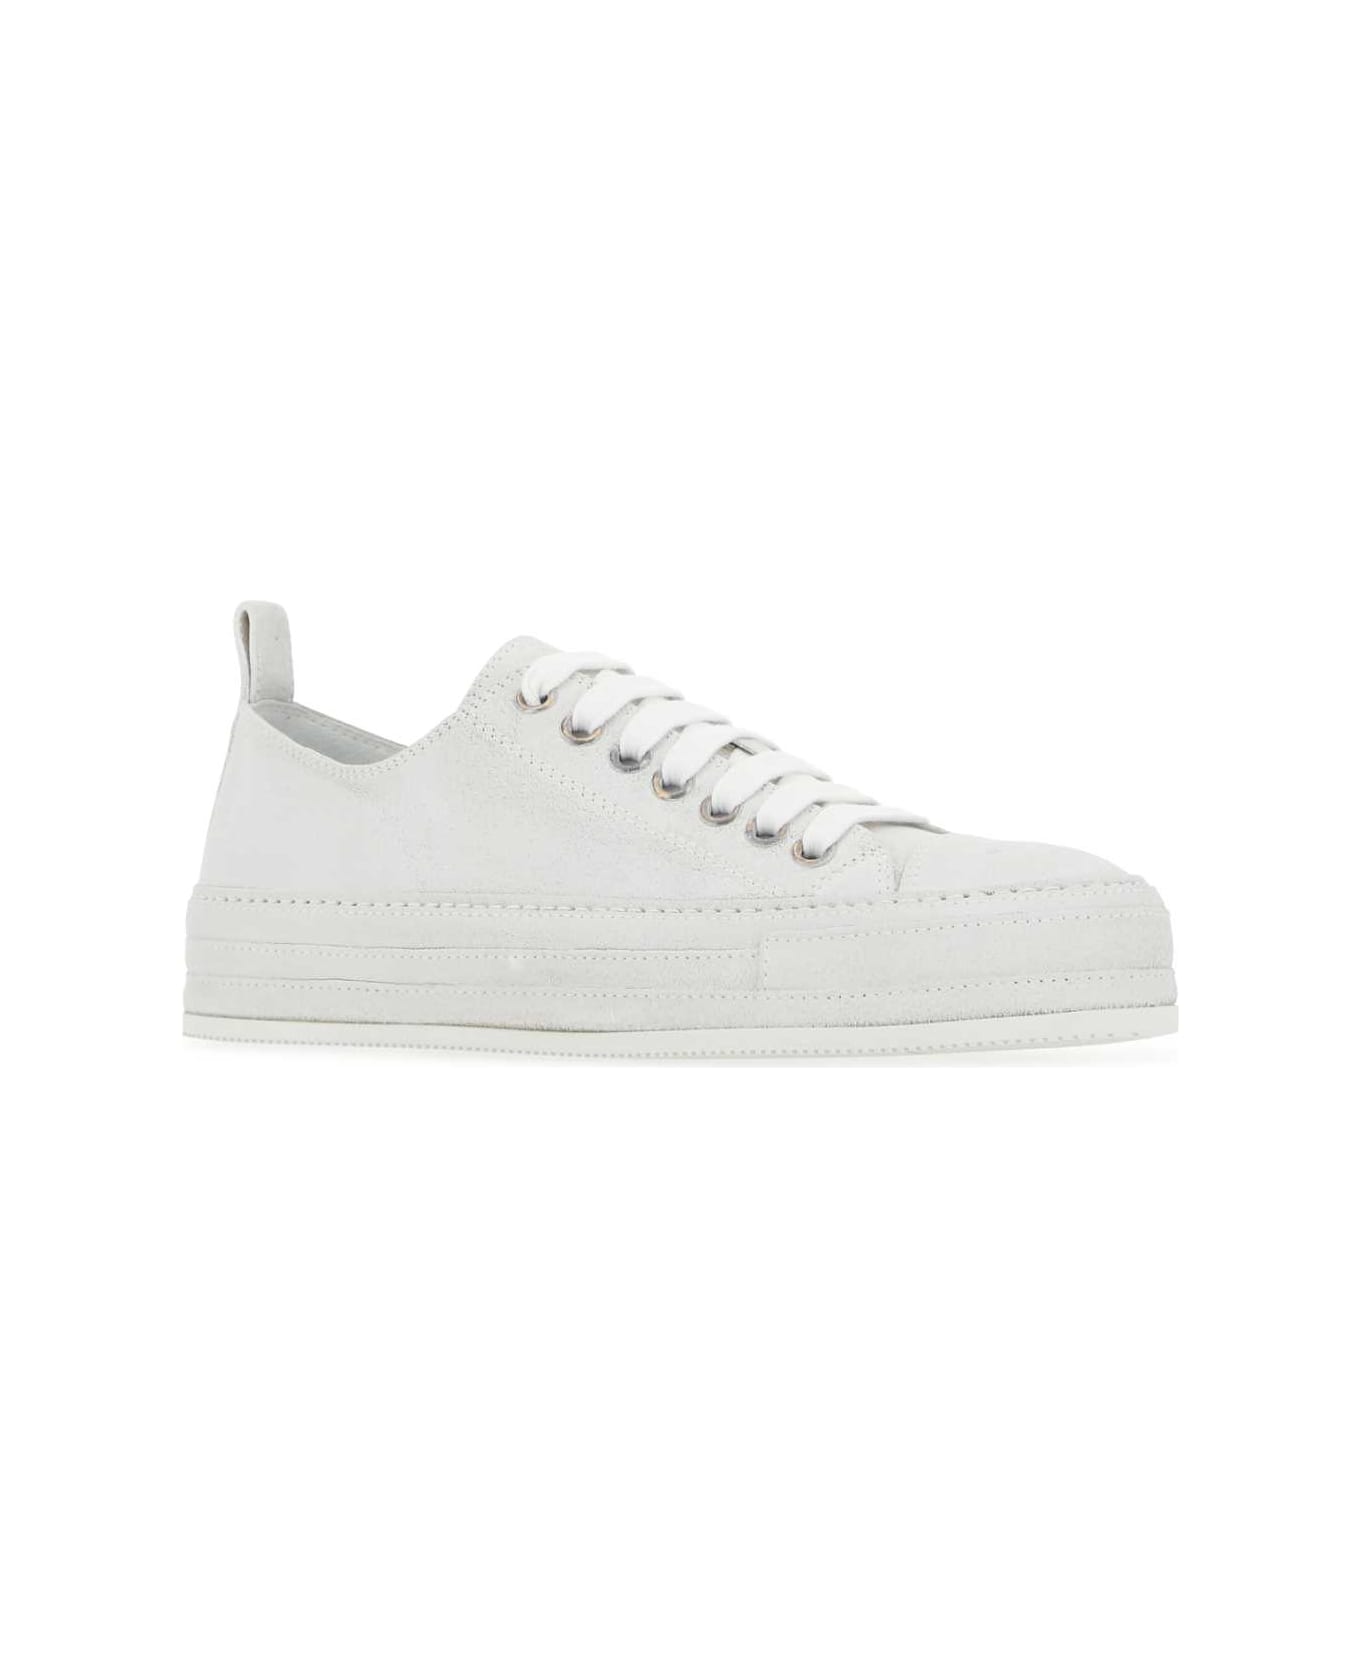 Ann Demeulemeester Embellished Leather Sneakers - 001 スニーカー